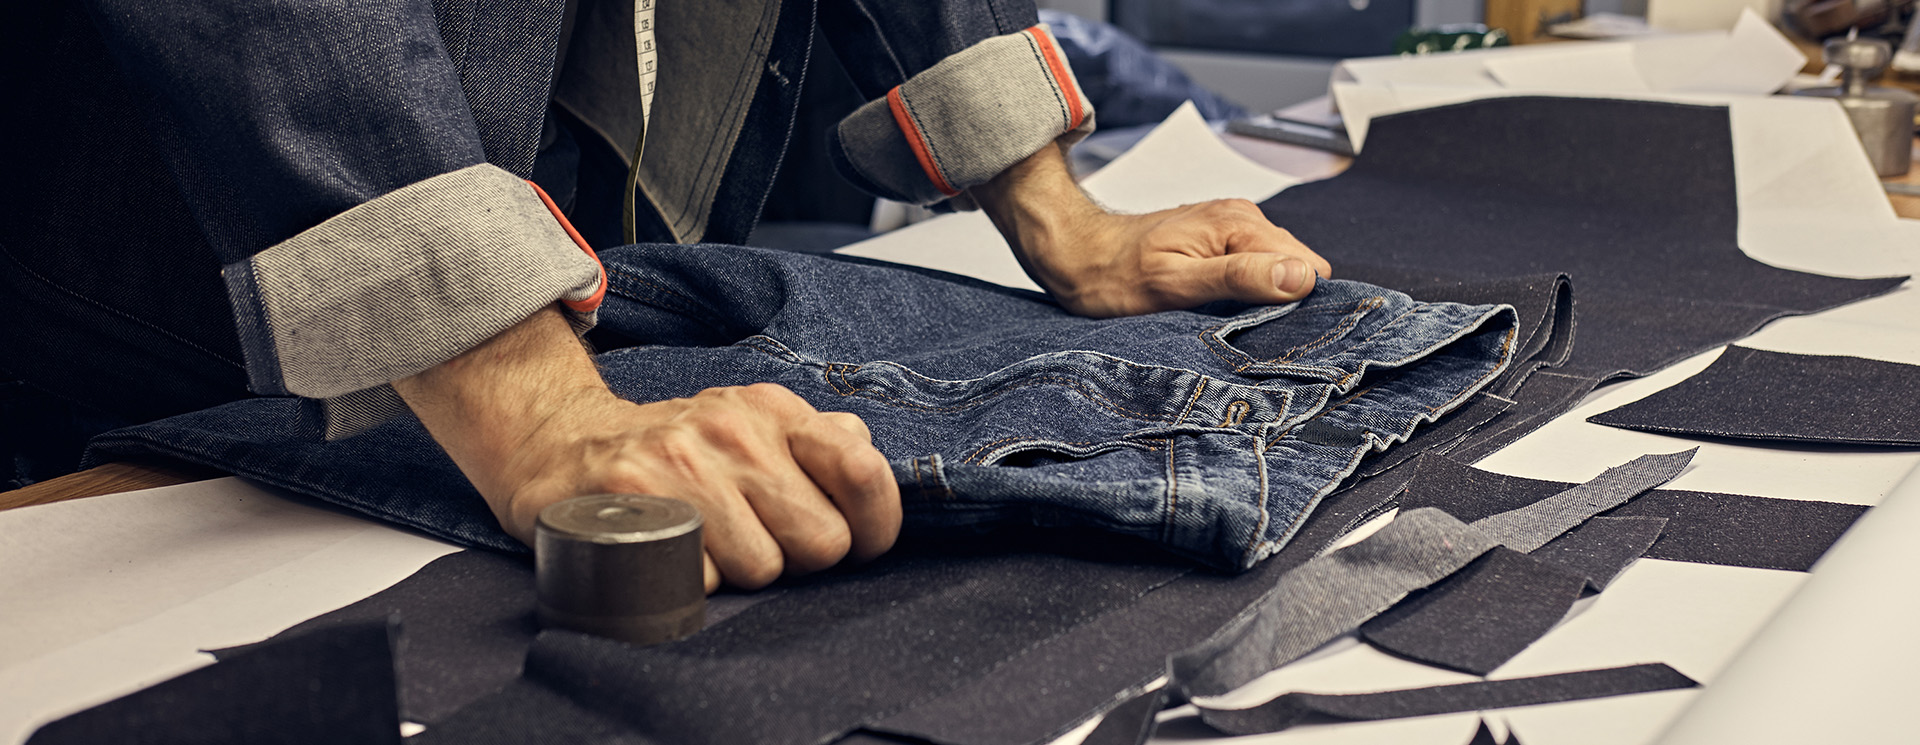 Every pair of custom jeans handcrafted with pride – Bespoke jeans for men and women world over